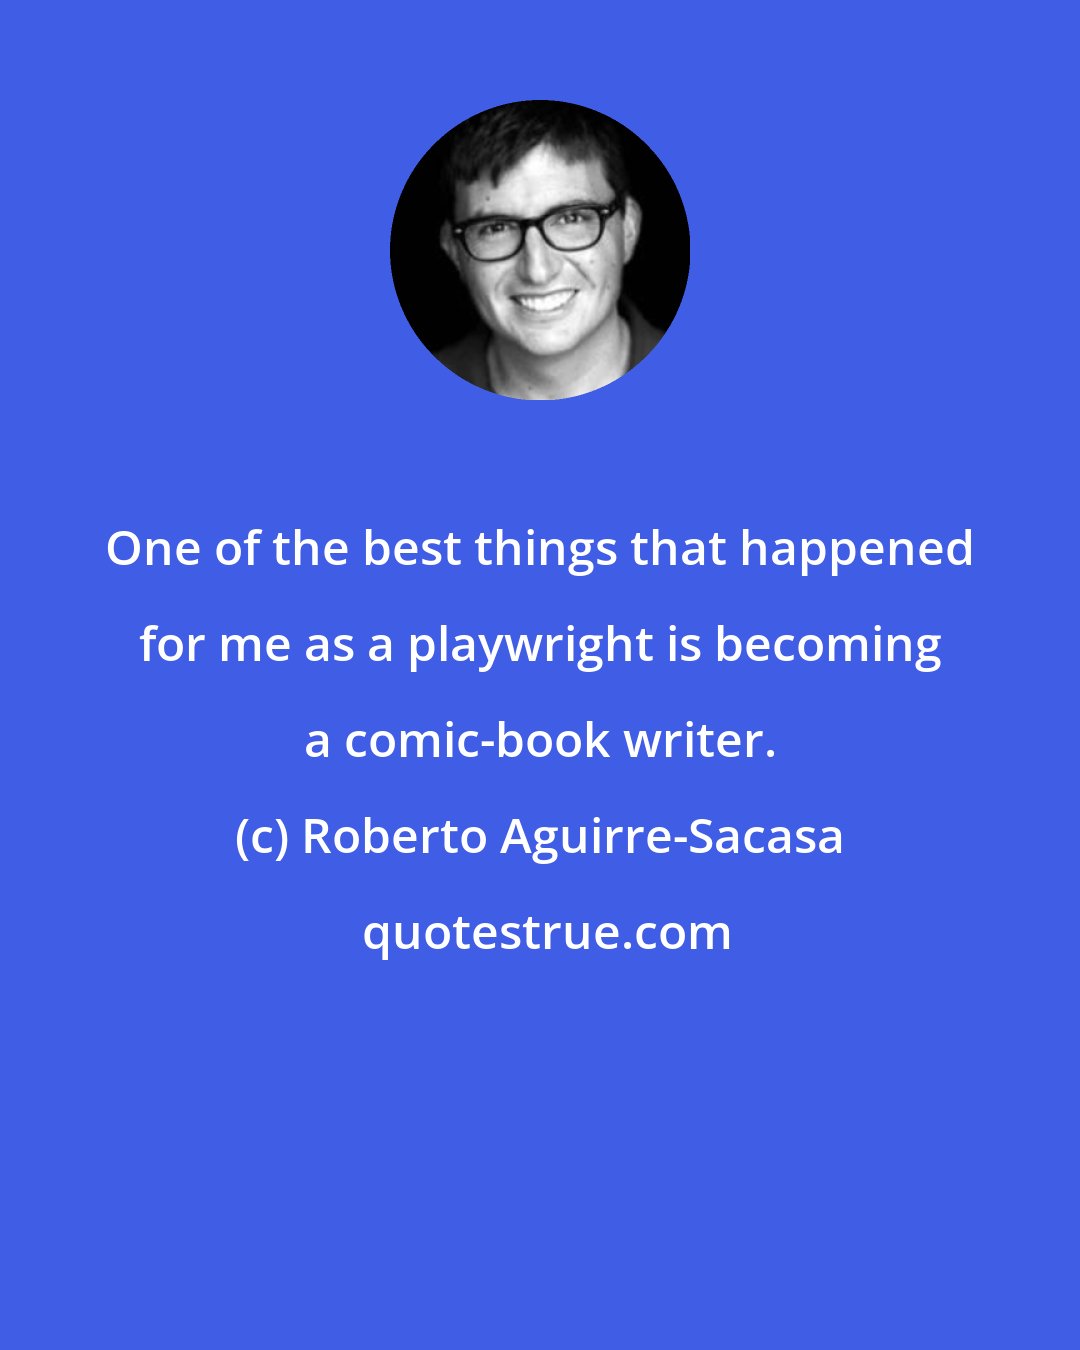 Roberto Aguirre-Sacasa: One of the best things that happened for me as a playwright is becoming a comic-book writer.